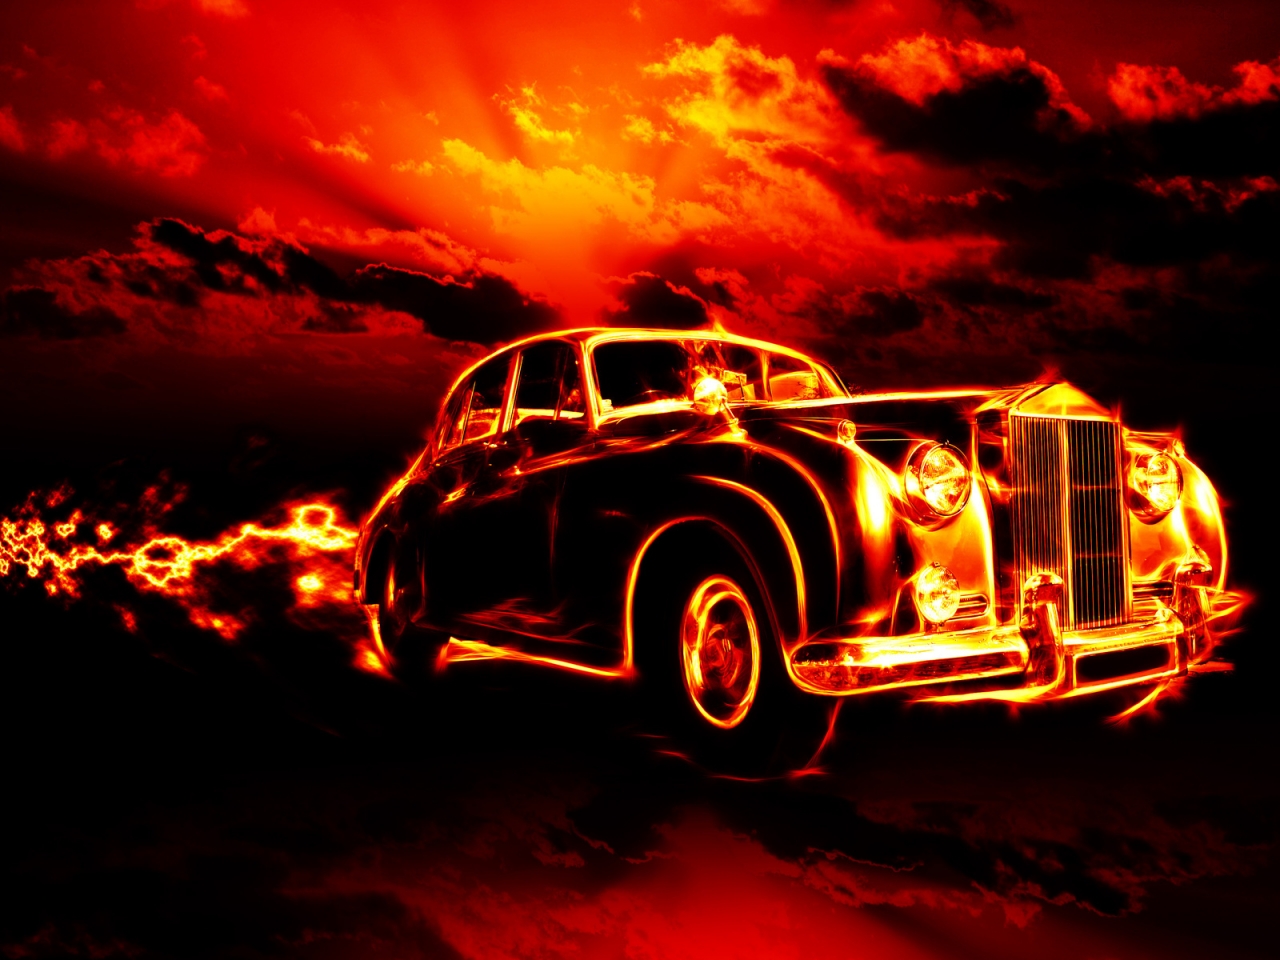 Vintage Car in Fire for 1280 x 960 resolution